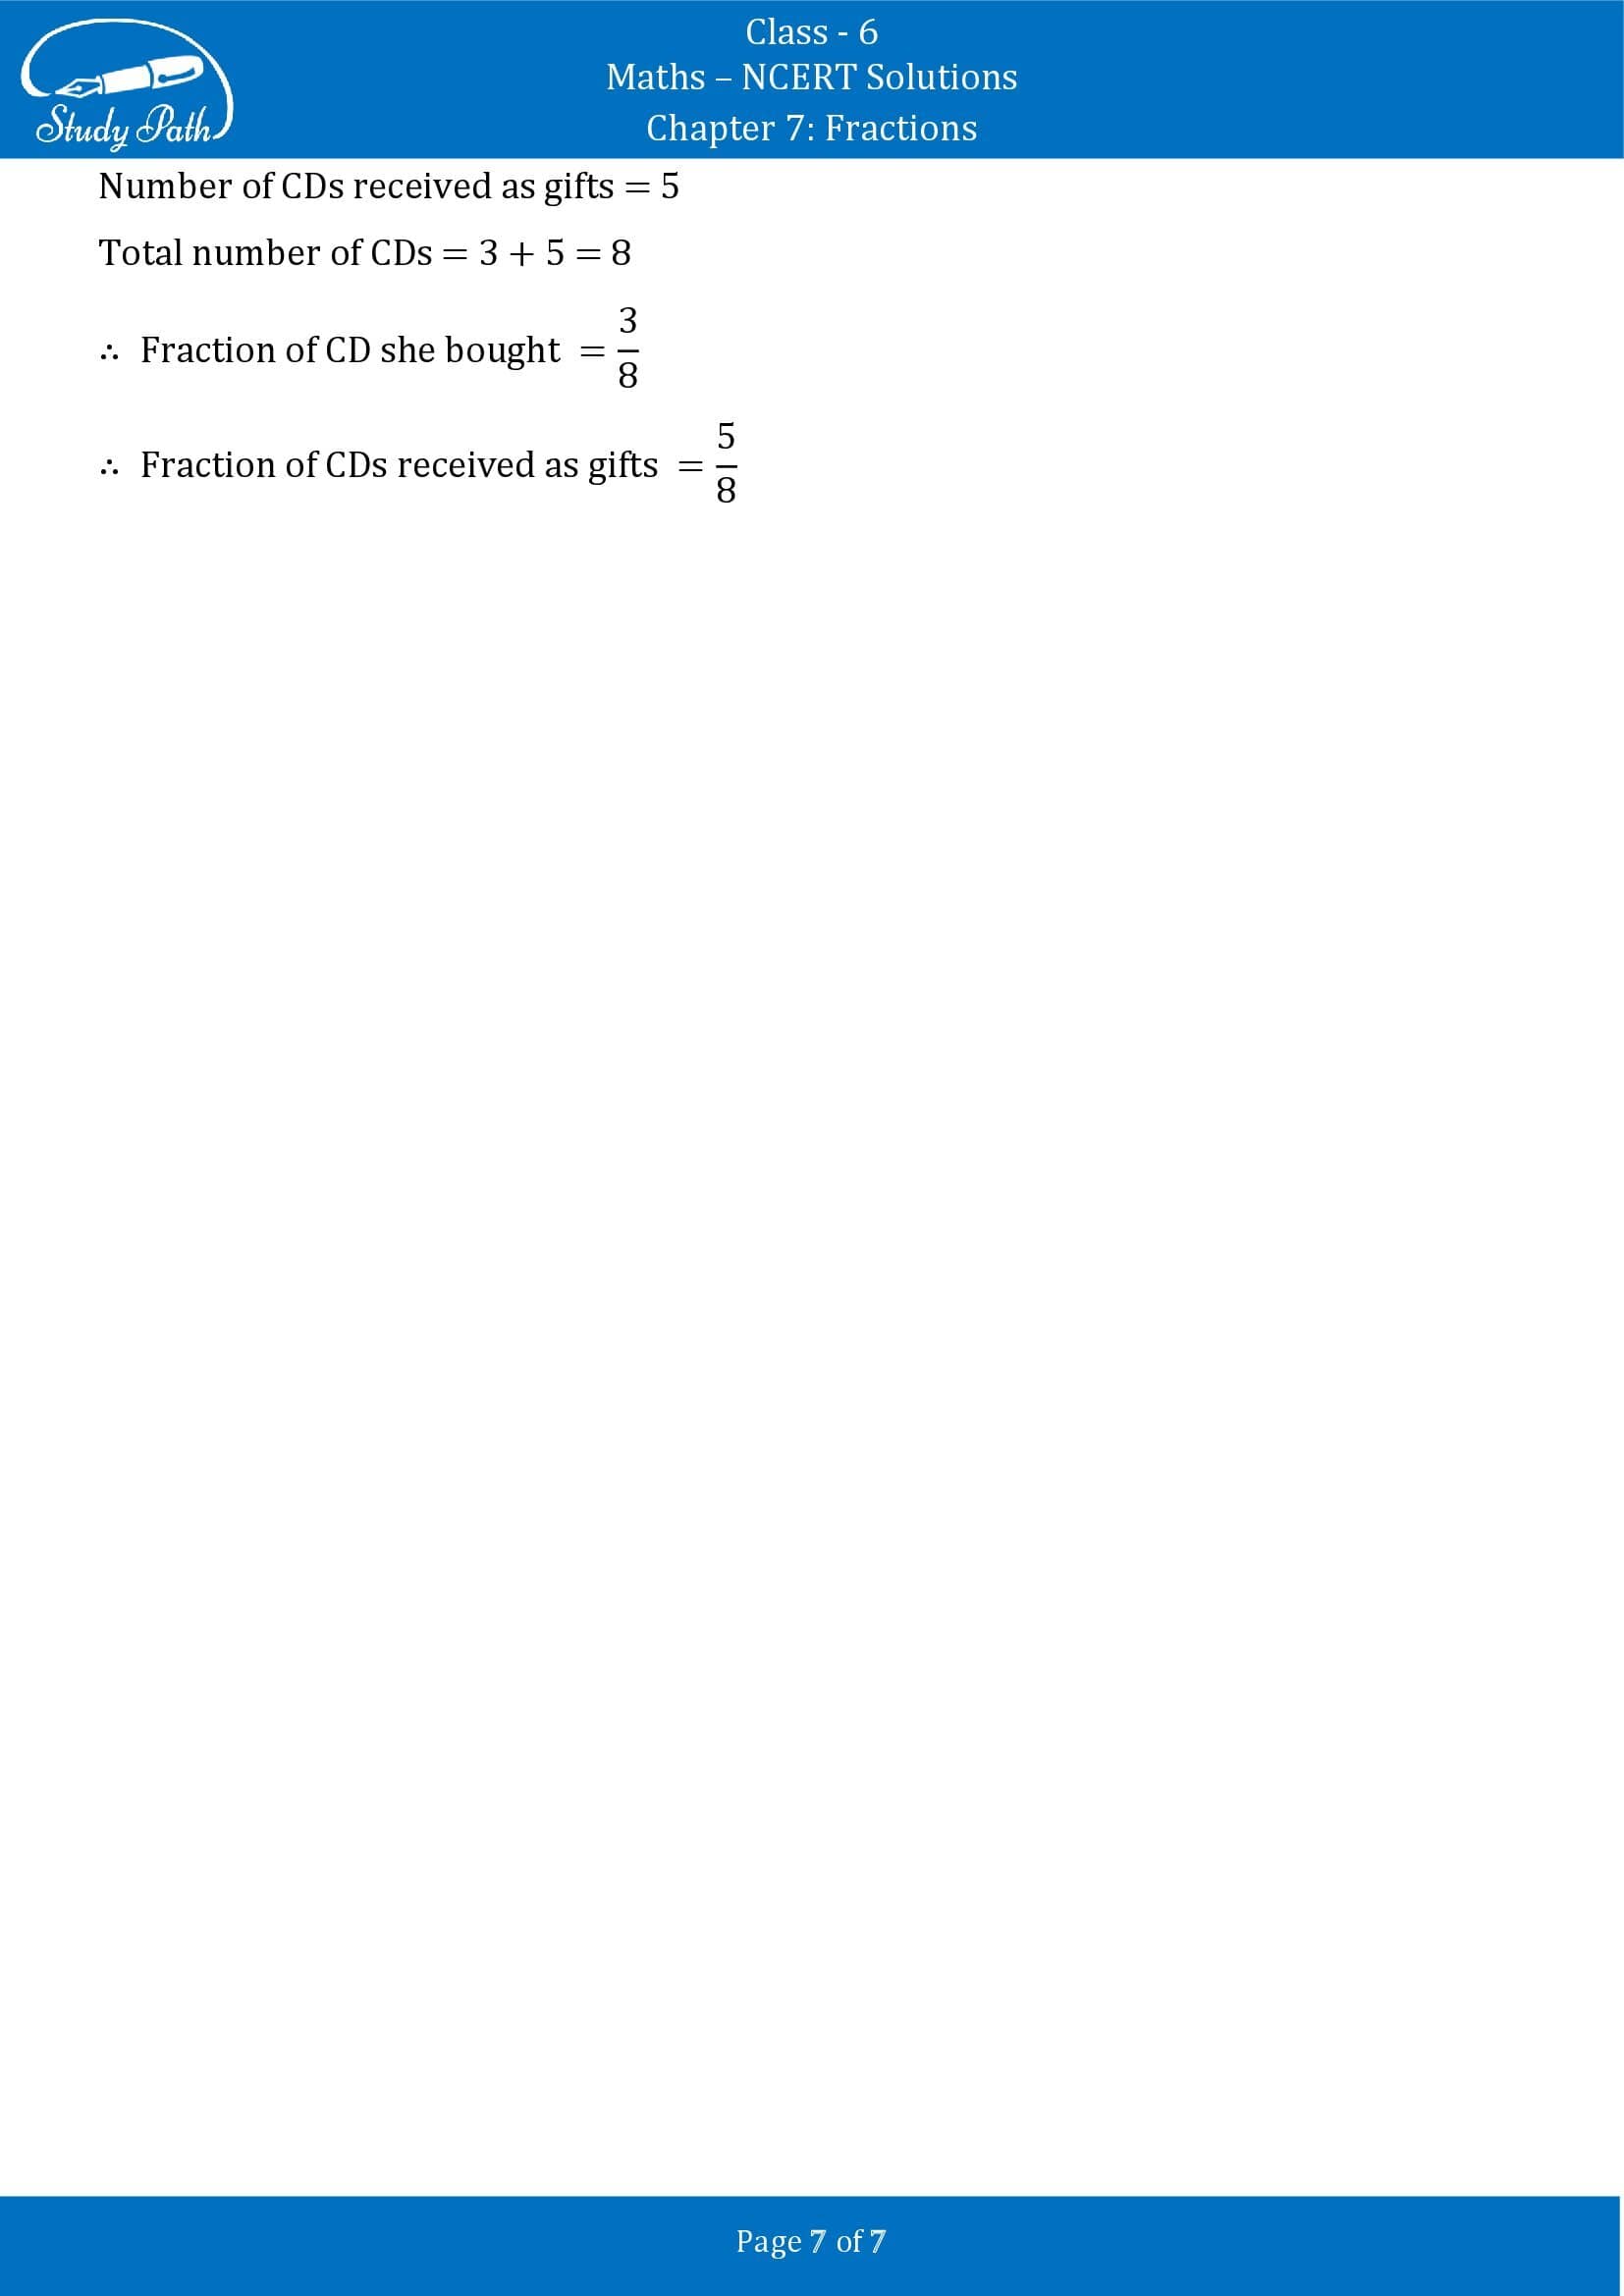 NCERT Solutions for Class 6 Maths Chapter 7 Fractions Exercise 7.1 00007